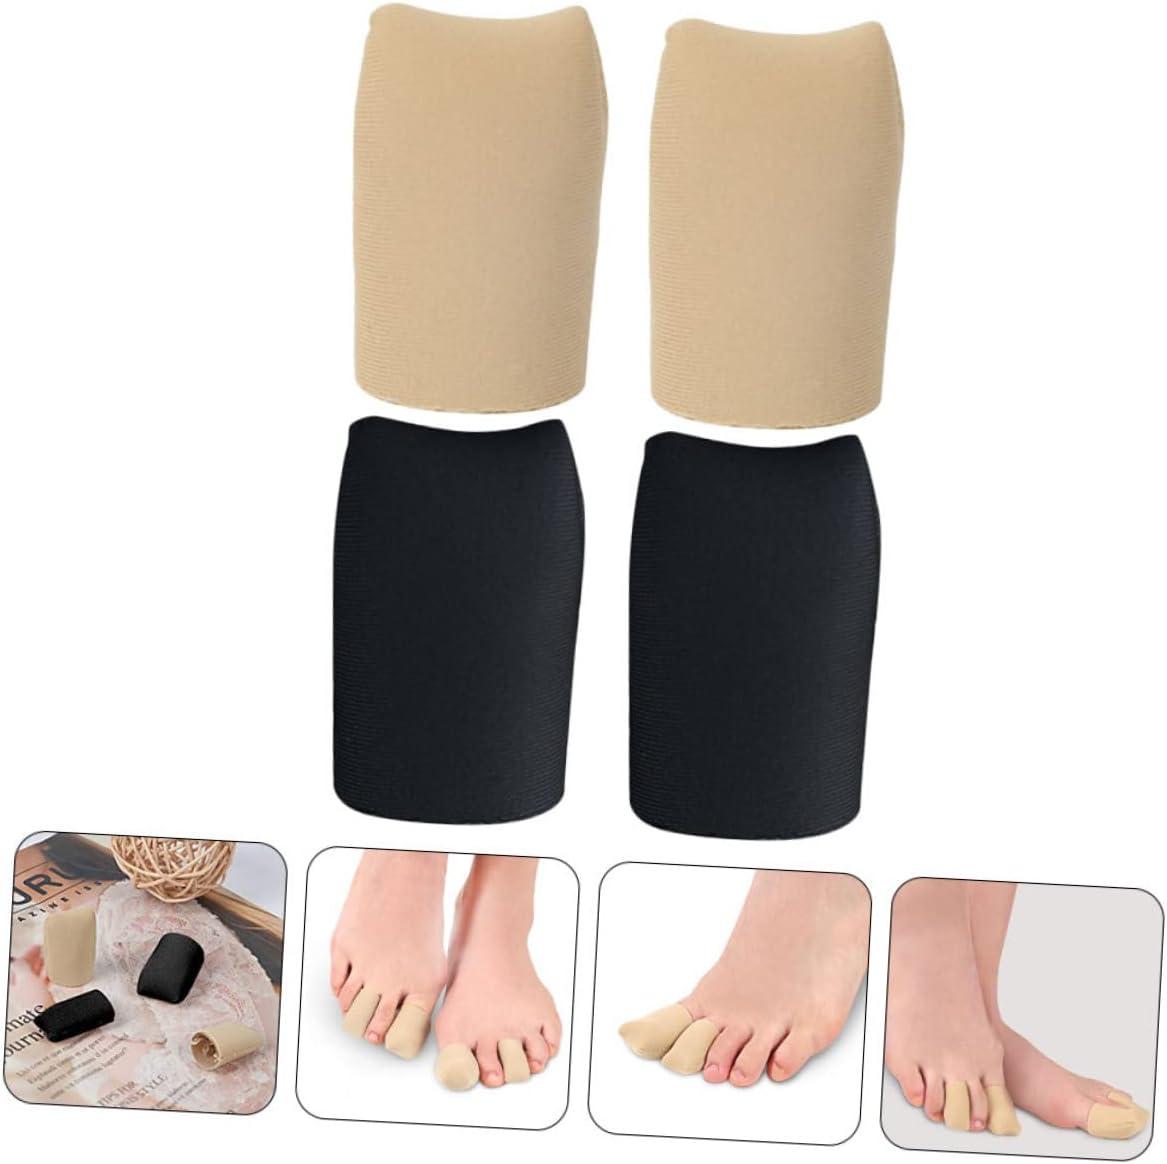 Silicone Toe Covers 2 Pairs Hand Toe Silicone Toe Sleeves Sleeve ...